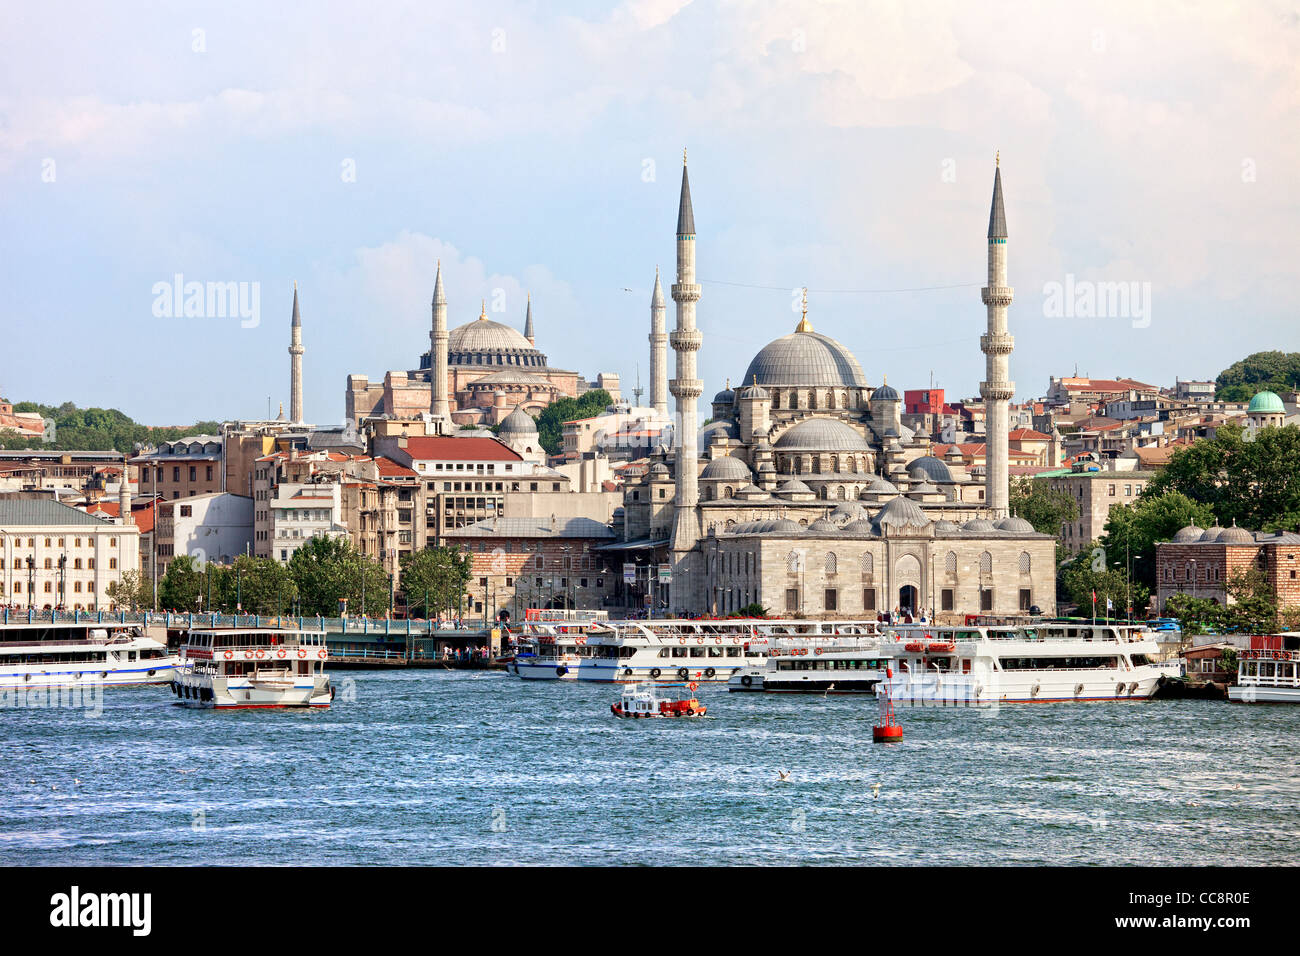 Scenery of the Eminonu district in the city of Istanbul in Turkey with New Mosque and Hagia Sophia at the farther end Stock Photo